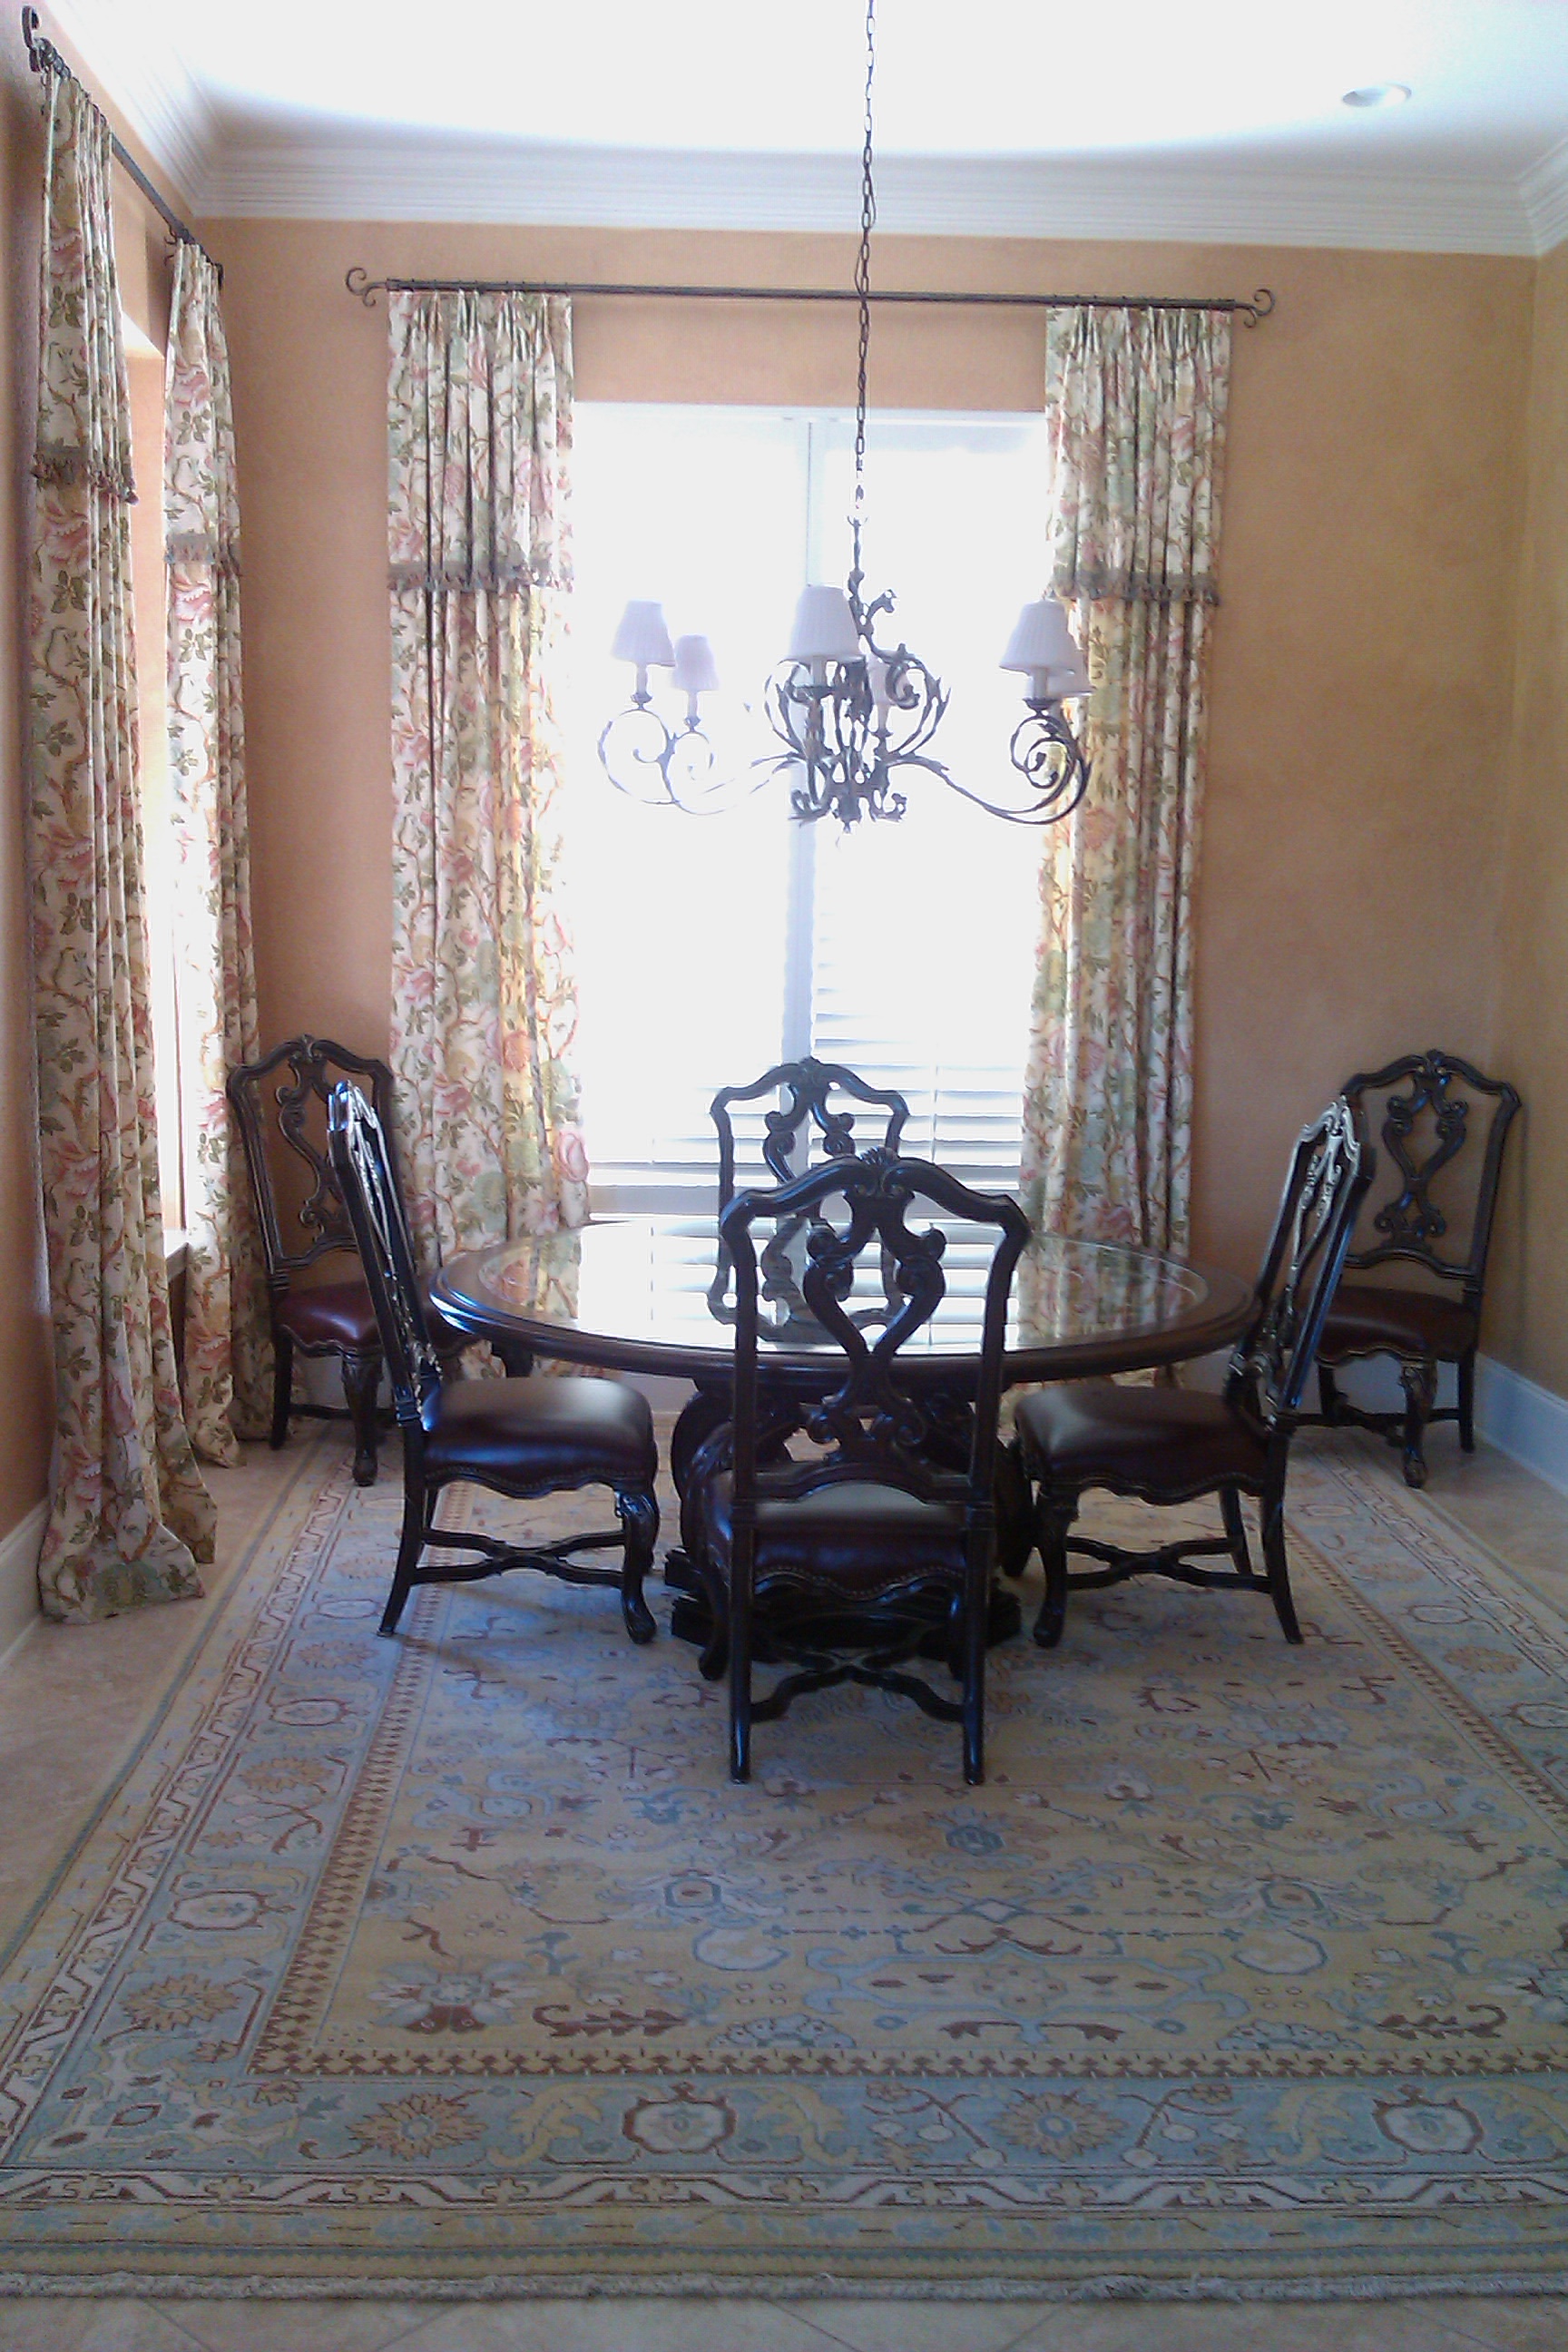 Dining Room Italian Style with Glazed Walls | Flickr - Photo Sharing!